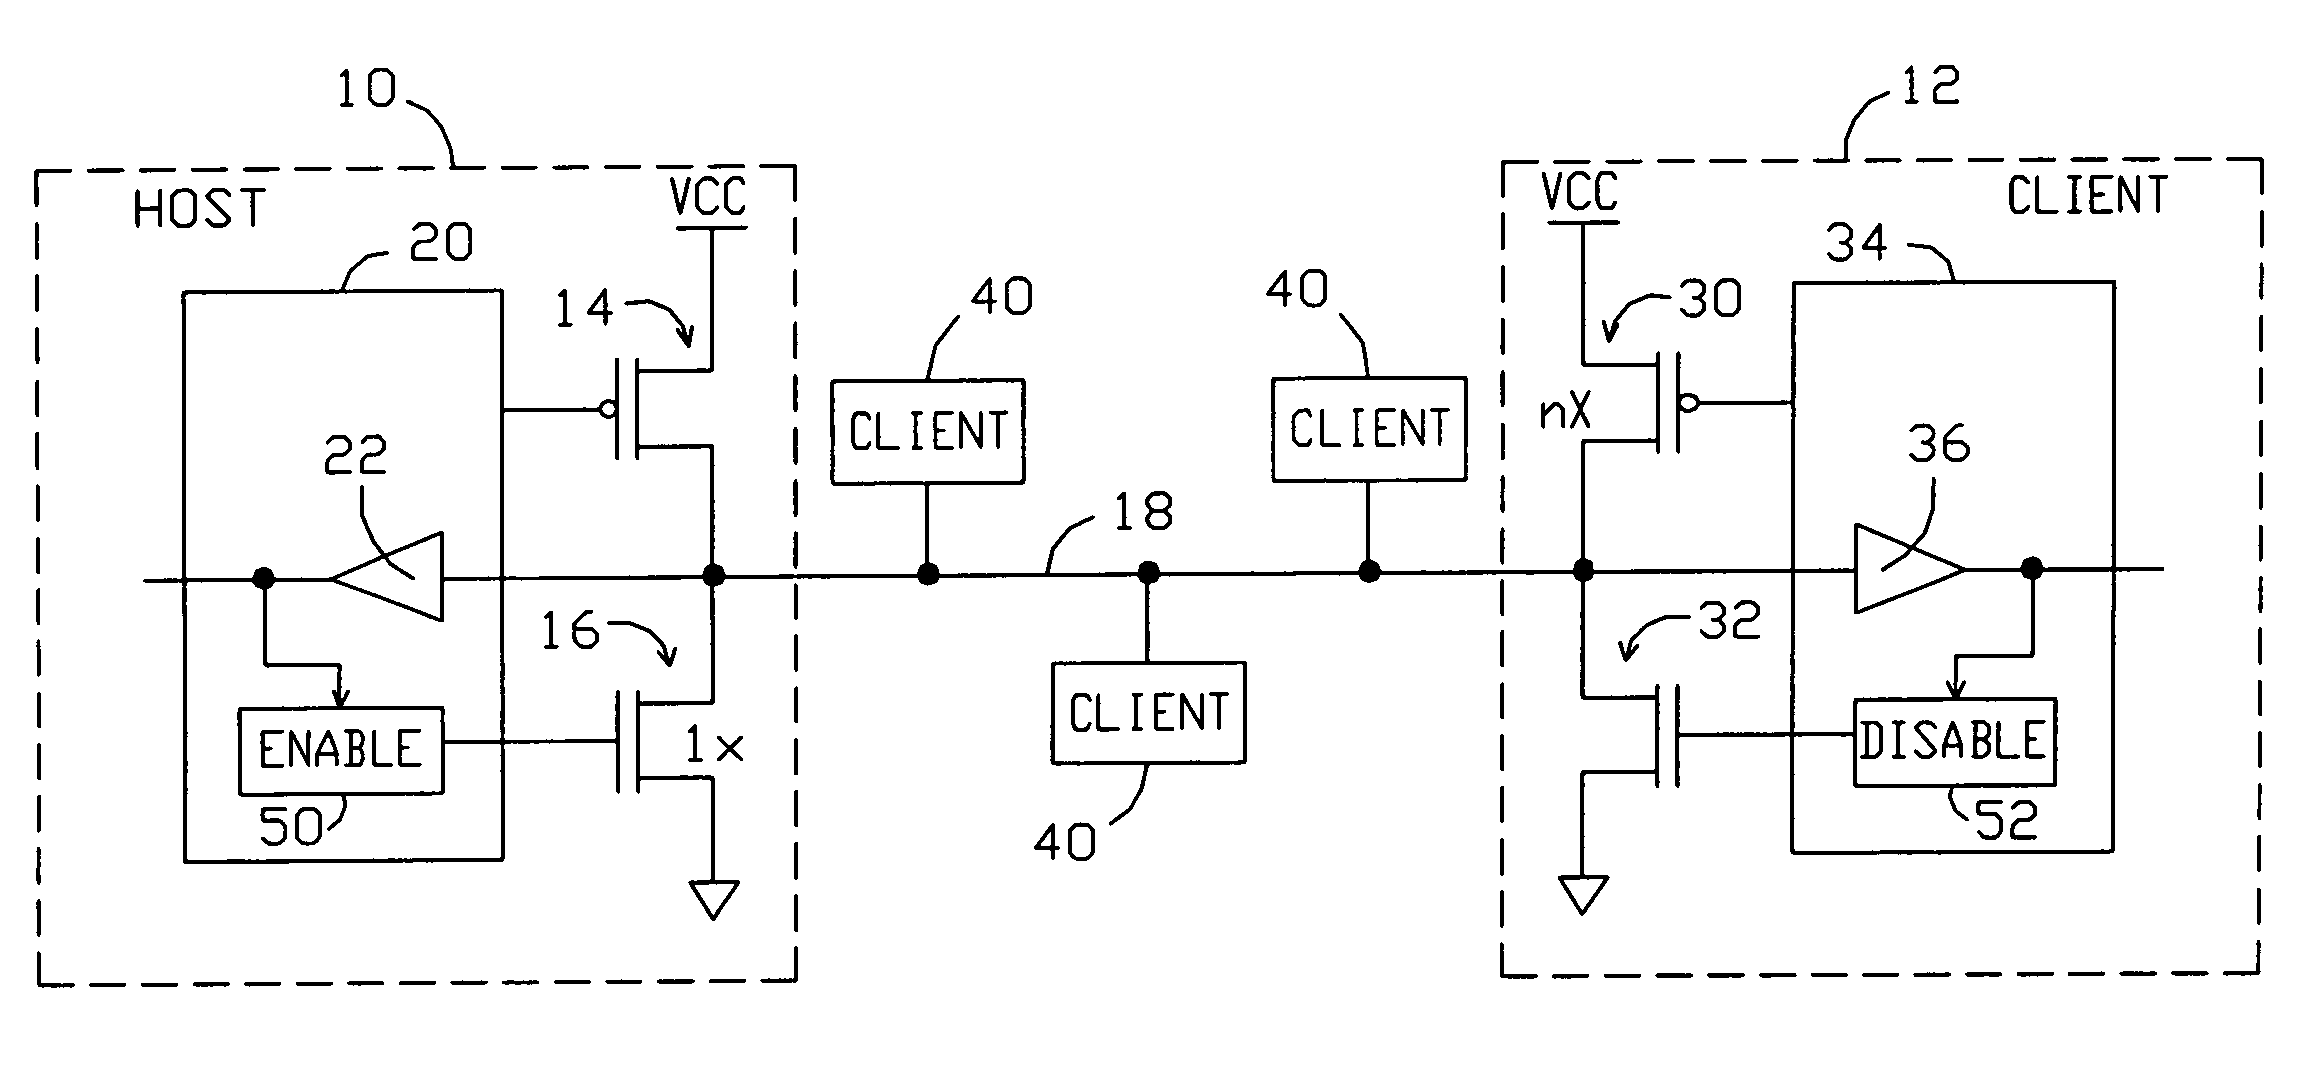 Single wire bus communication system with method for handling simultaneous responses from multiple clients